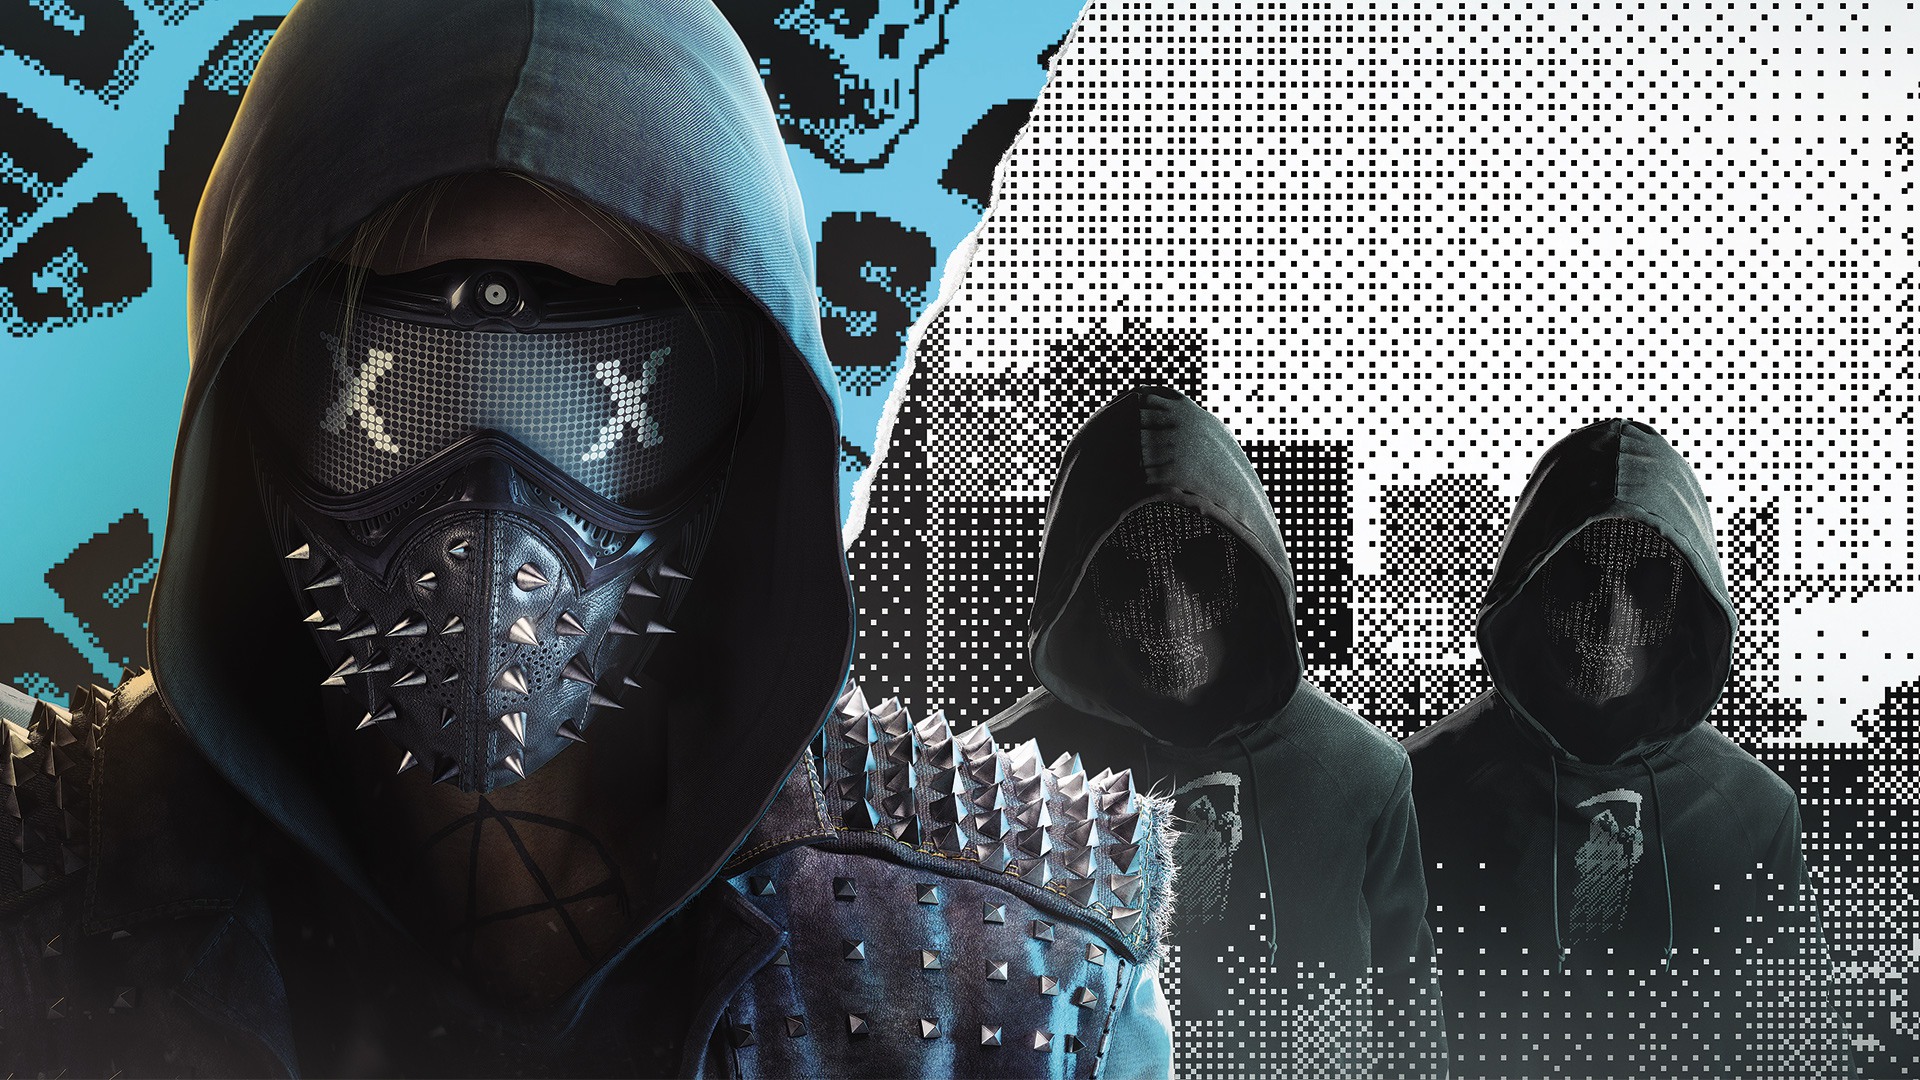 Watch Dogs 2 Wallpapers, Pictures, Images